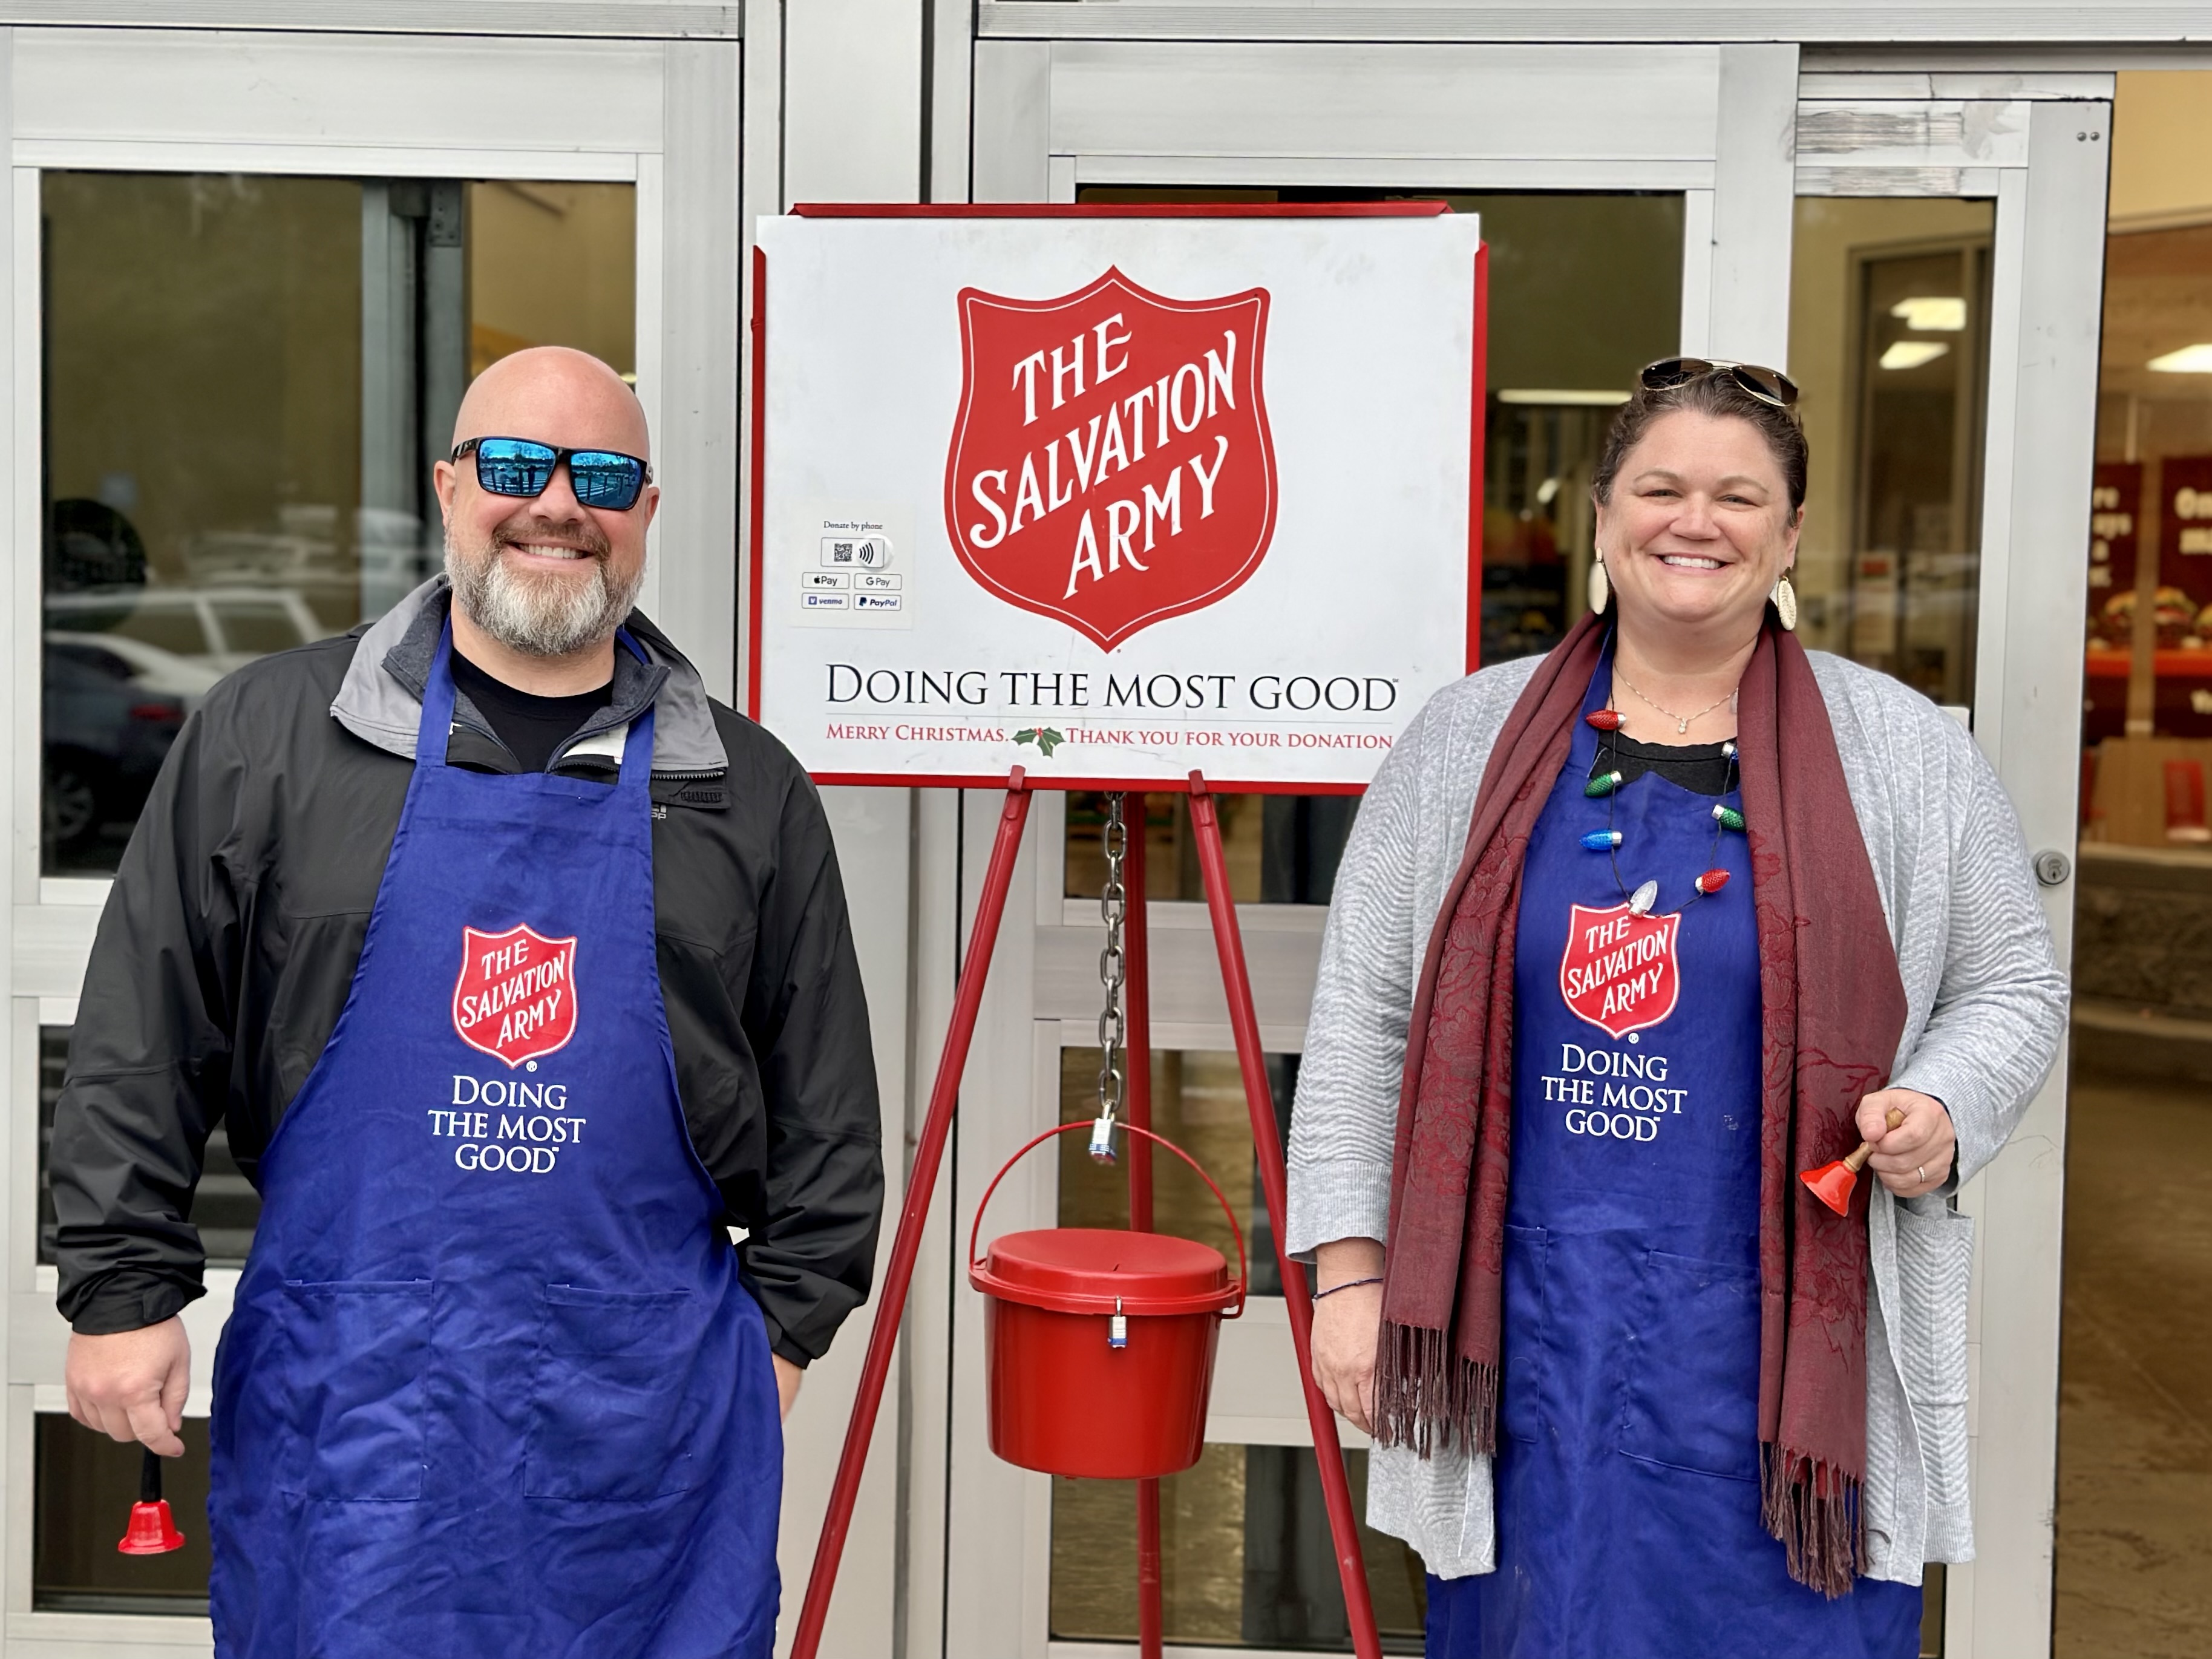 Ringing the bell for The Salvation Army